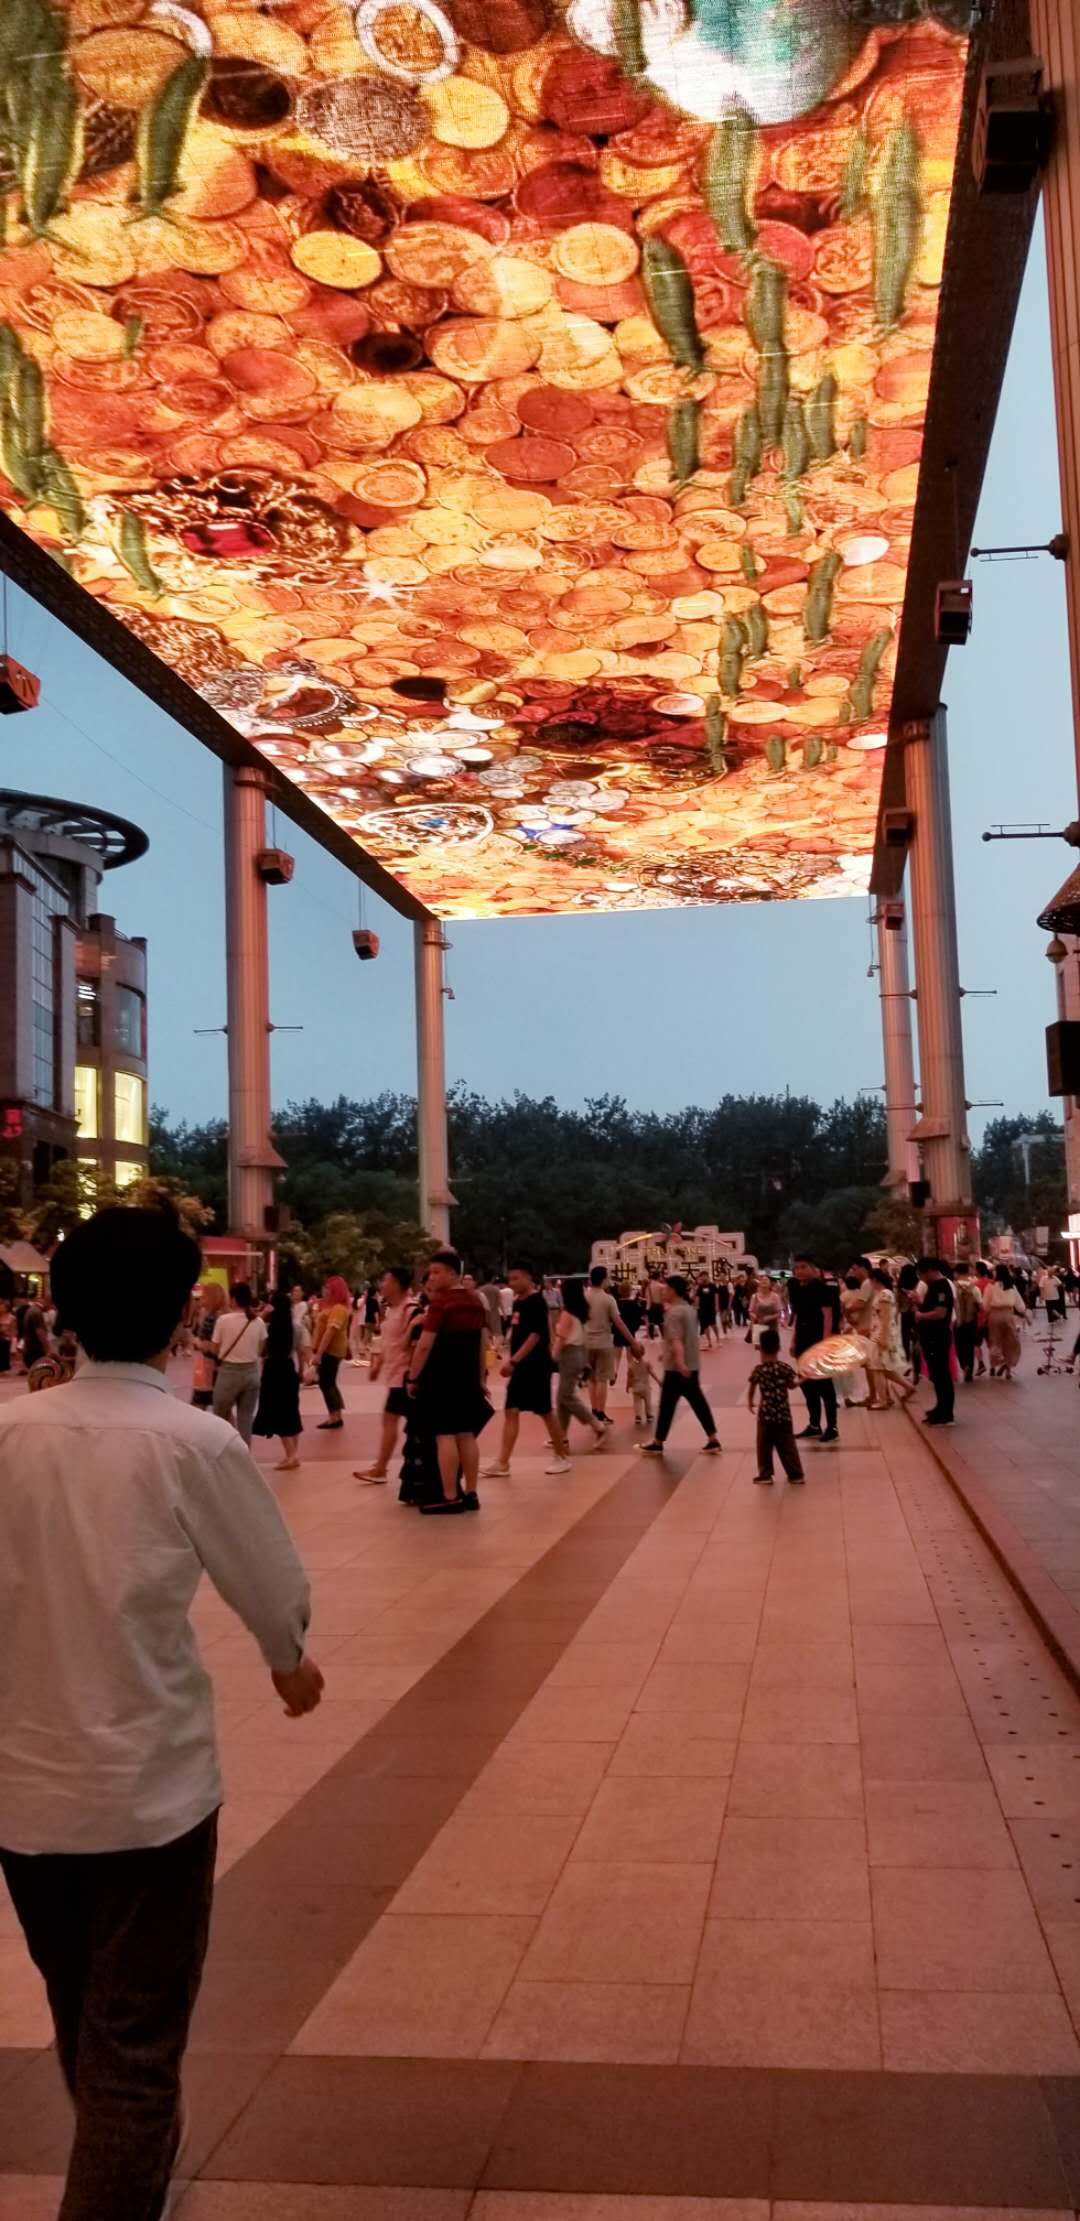 The Place's LED screen ceiling